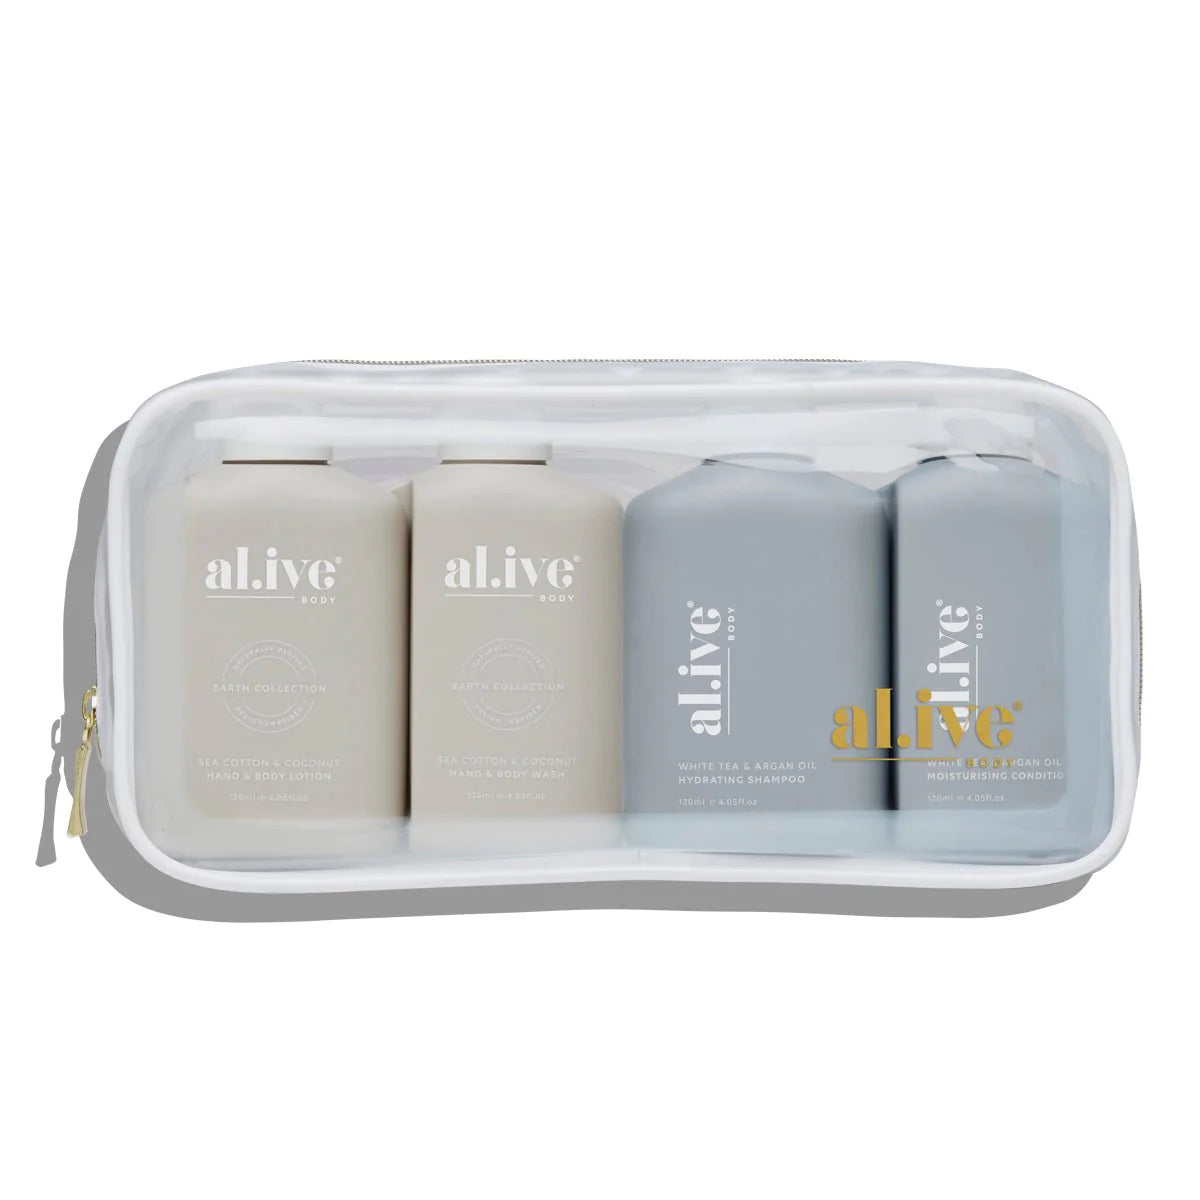 al.ive body Haircare & Body Travel Pack